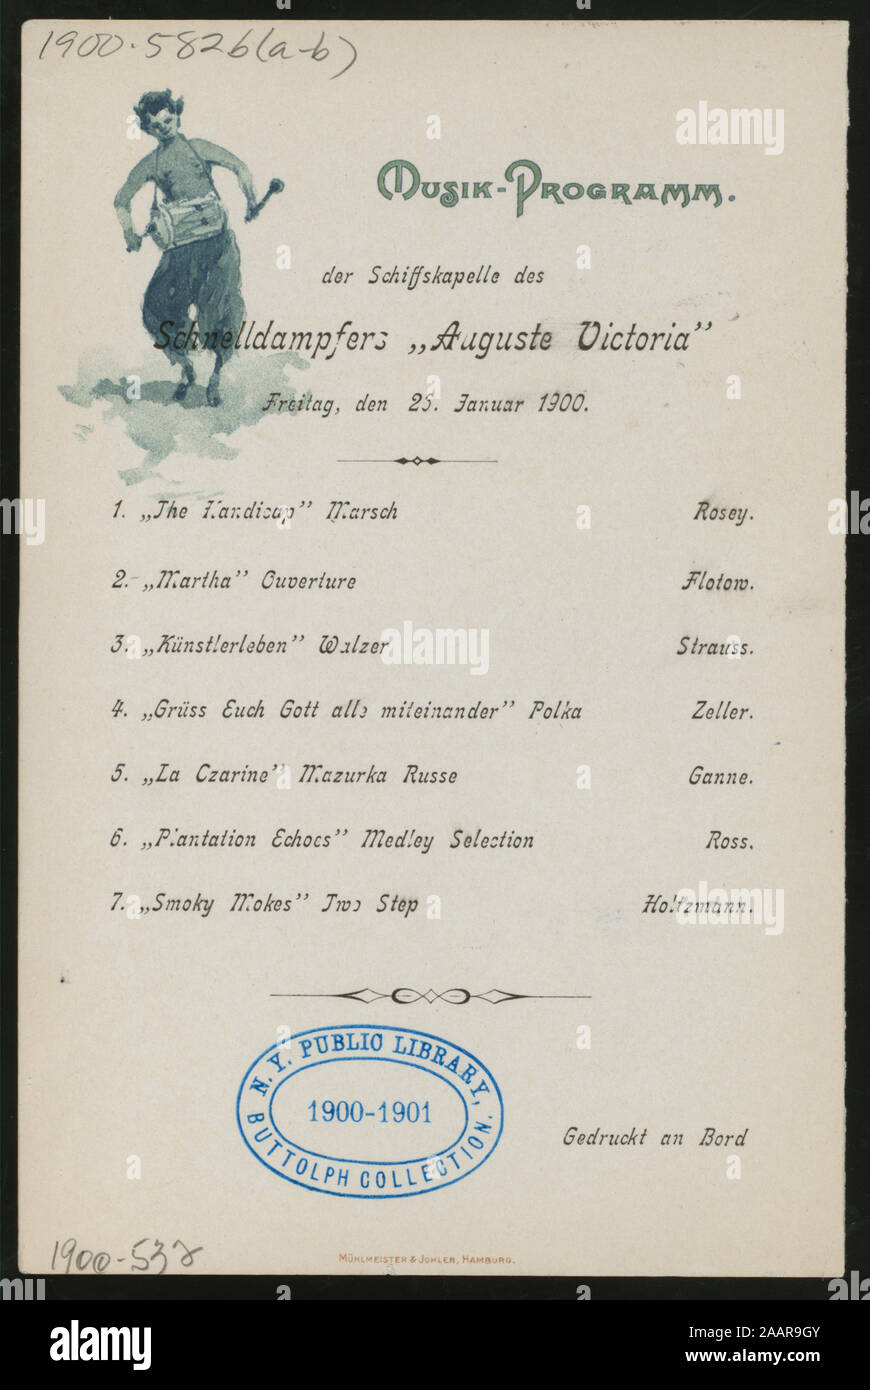 DINNER (held by) HAMBURG-AMERIKA LINIE (at) SS AUGUSTE VICTORIA (SS;) SHIPS AT SEA;SEPARATE ENGLISH AND GERMAN LISTING OF MENU;MUSICAL PROGRAM 1900-0532; DINNER [held by] HAMBURG-AMERIKA LINIE [at] SS AUGUSTE VICTORIA (SS;) Stock Photo